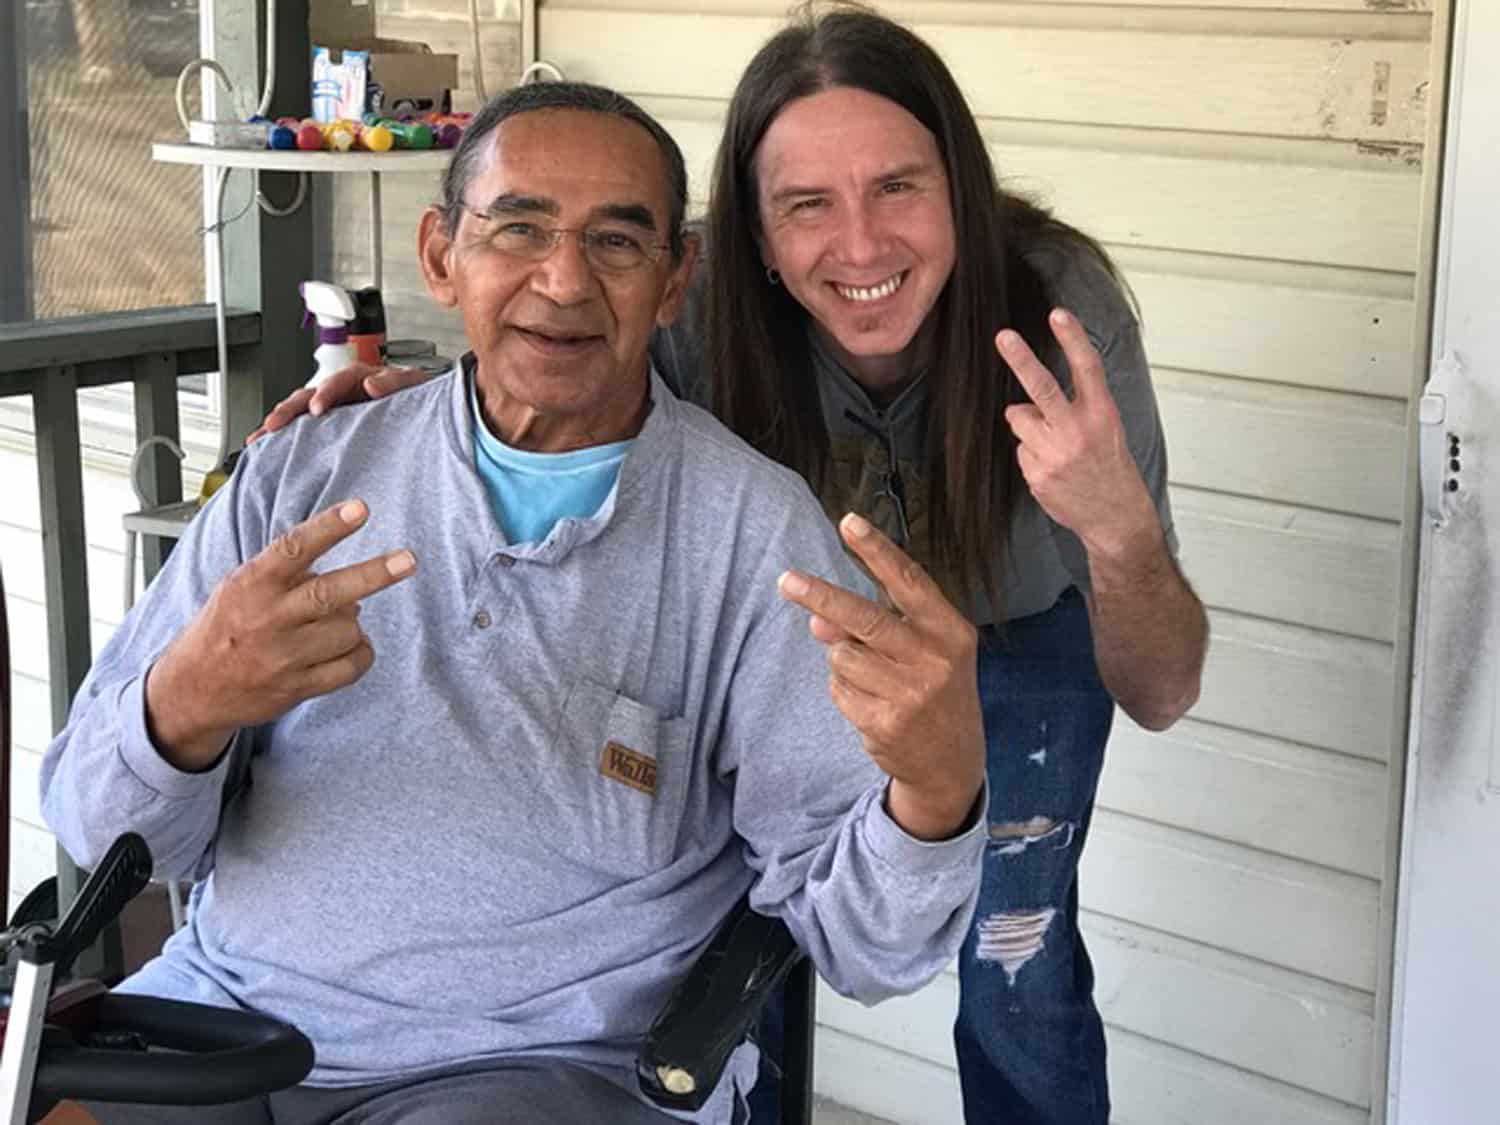 Larry Sellers and C.L. Harmon on a front porch. They are posing after an interview about Larry's celebrity status as a Native American actor.